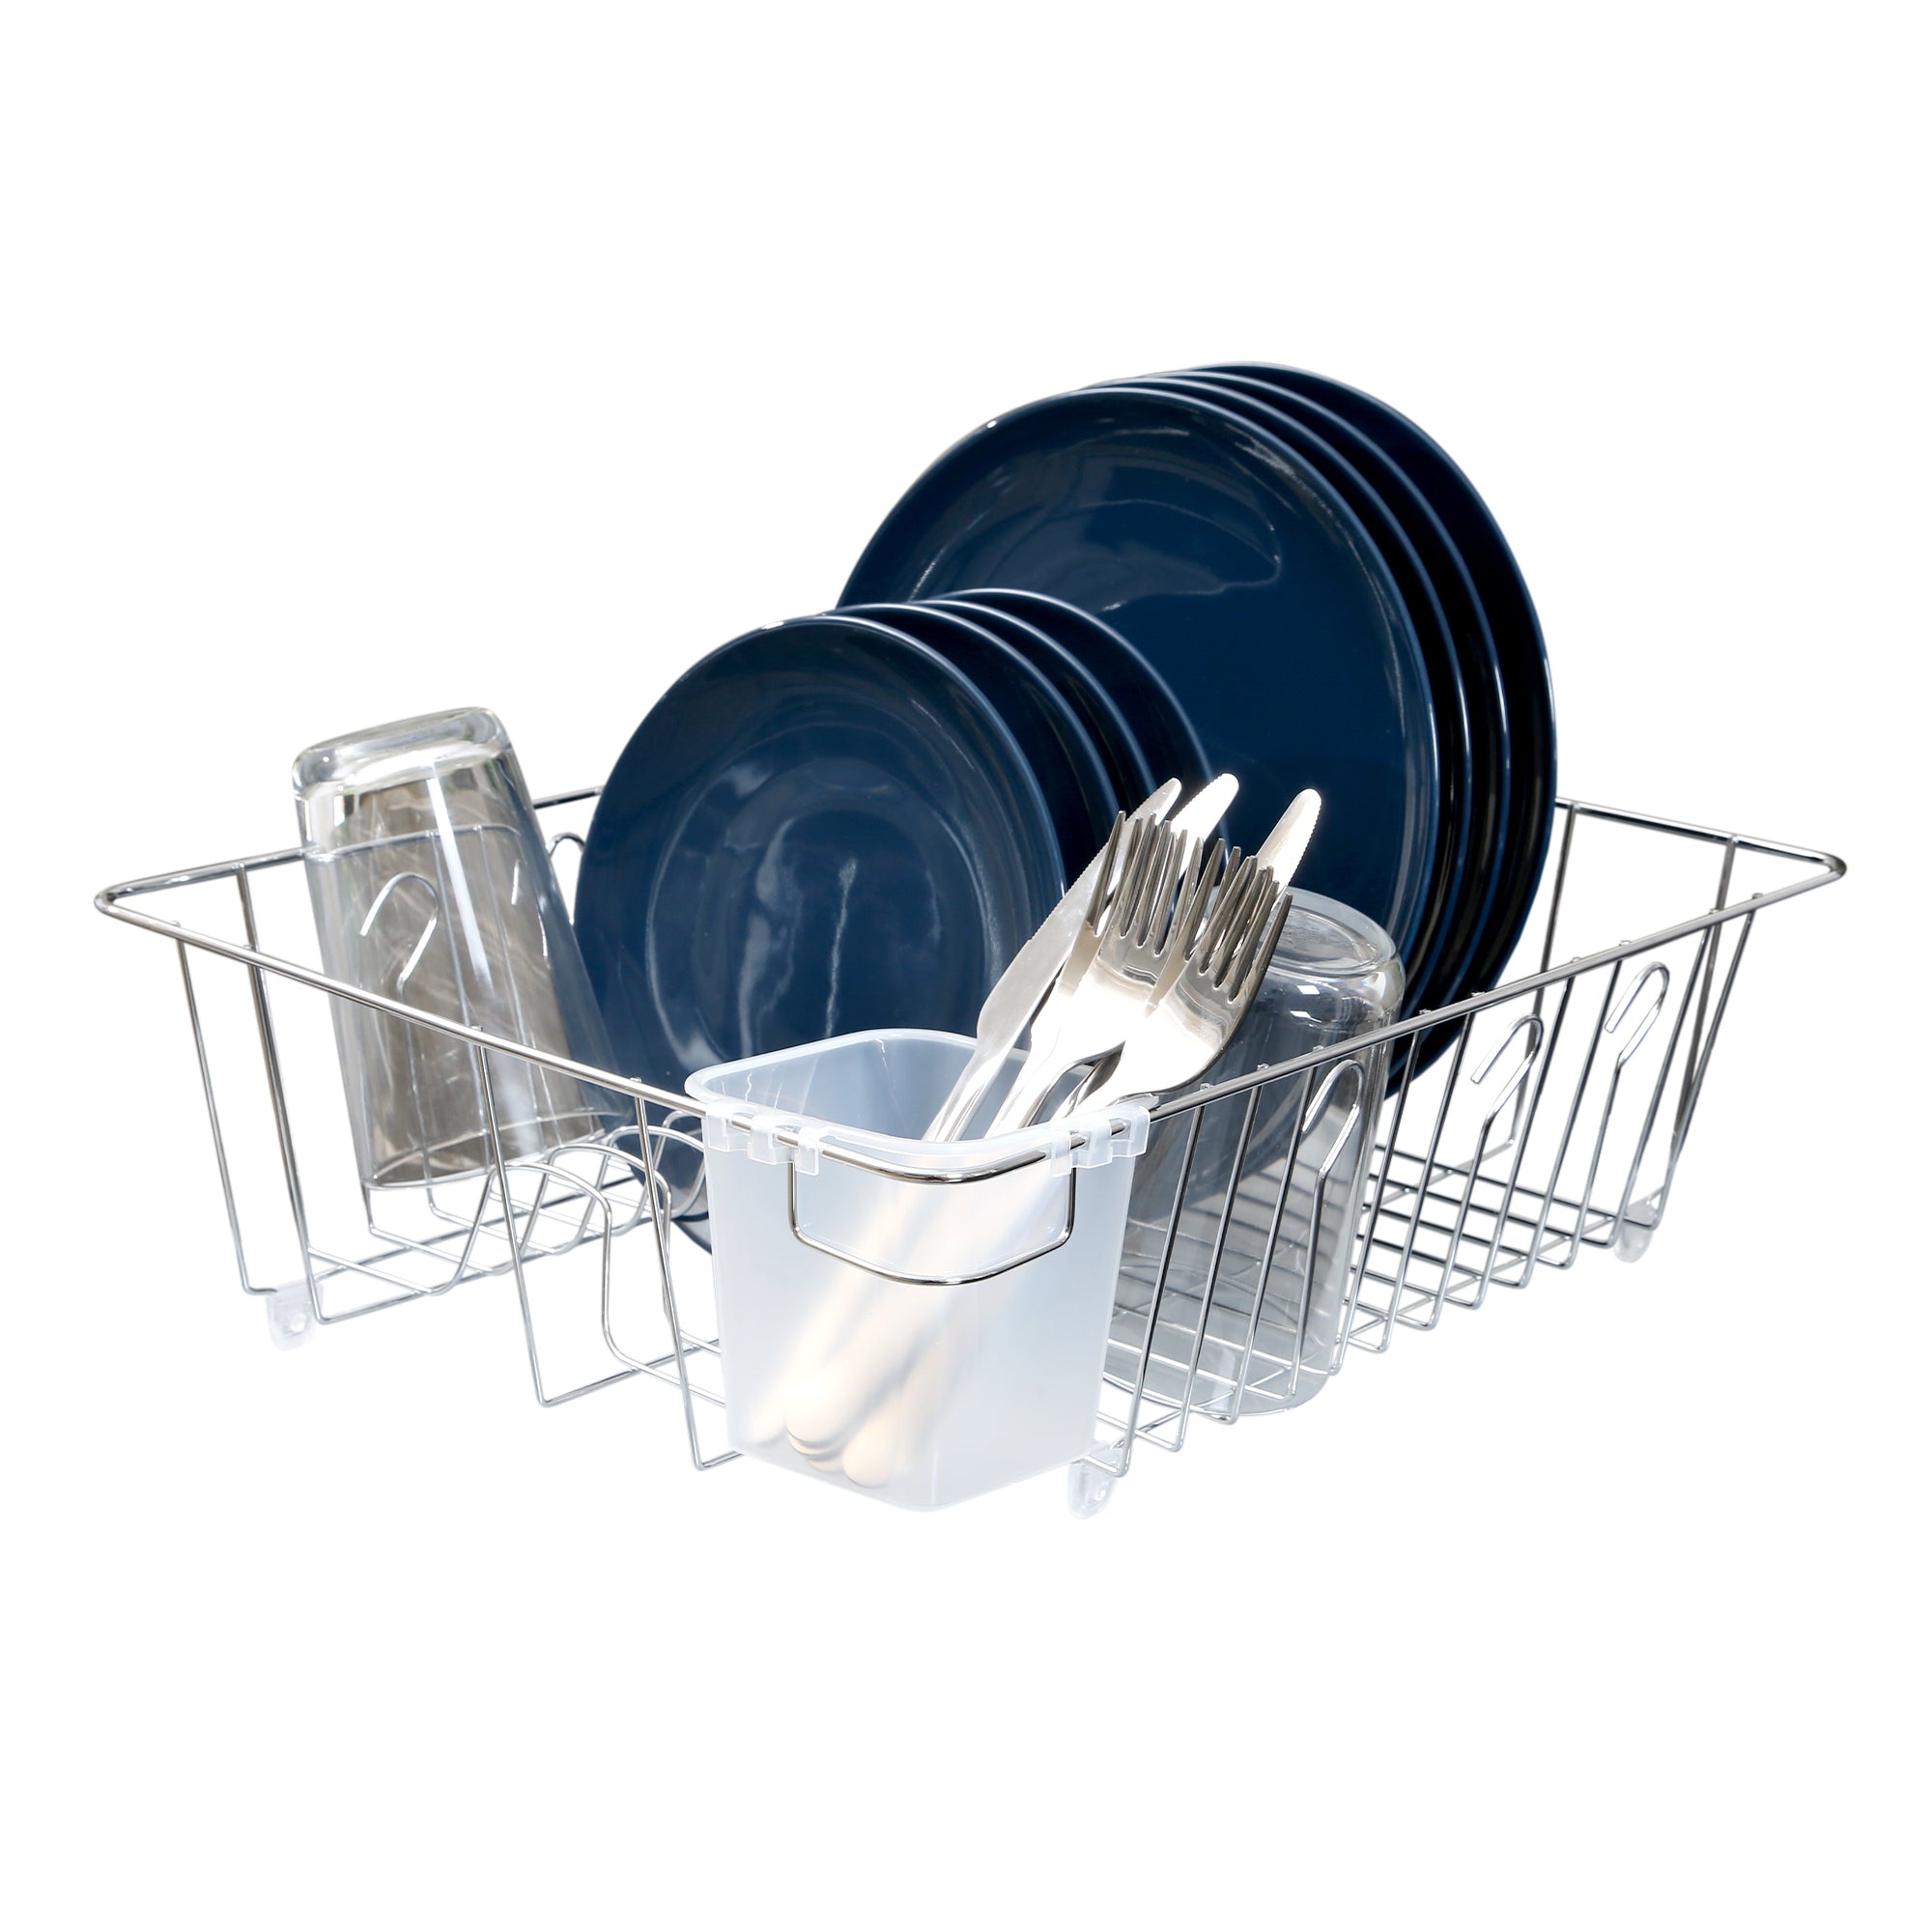 Dish Drainer Rack for In Sink or Counter Drying - Large - Smart Design® 13